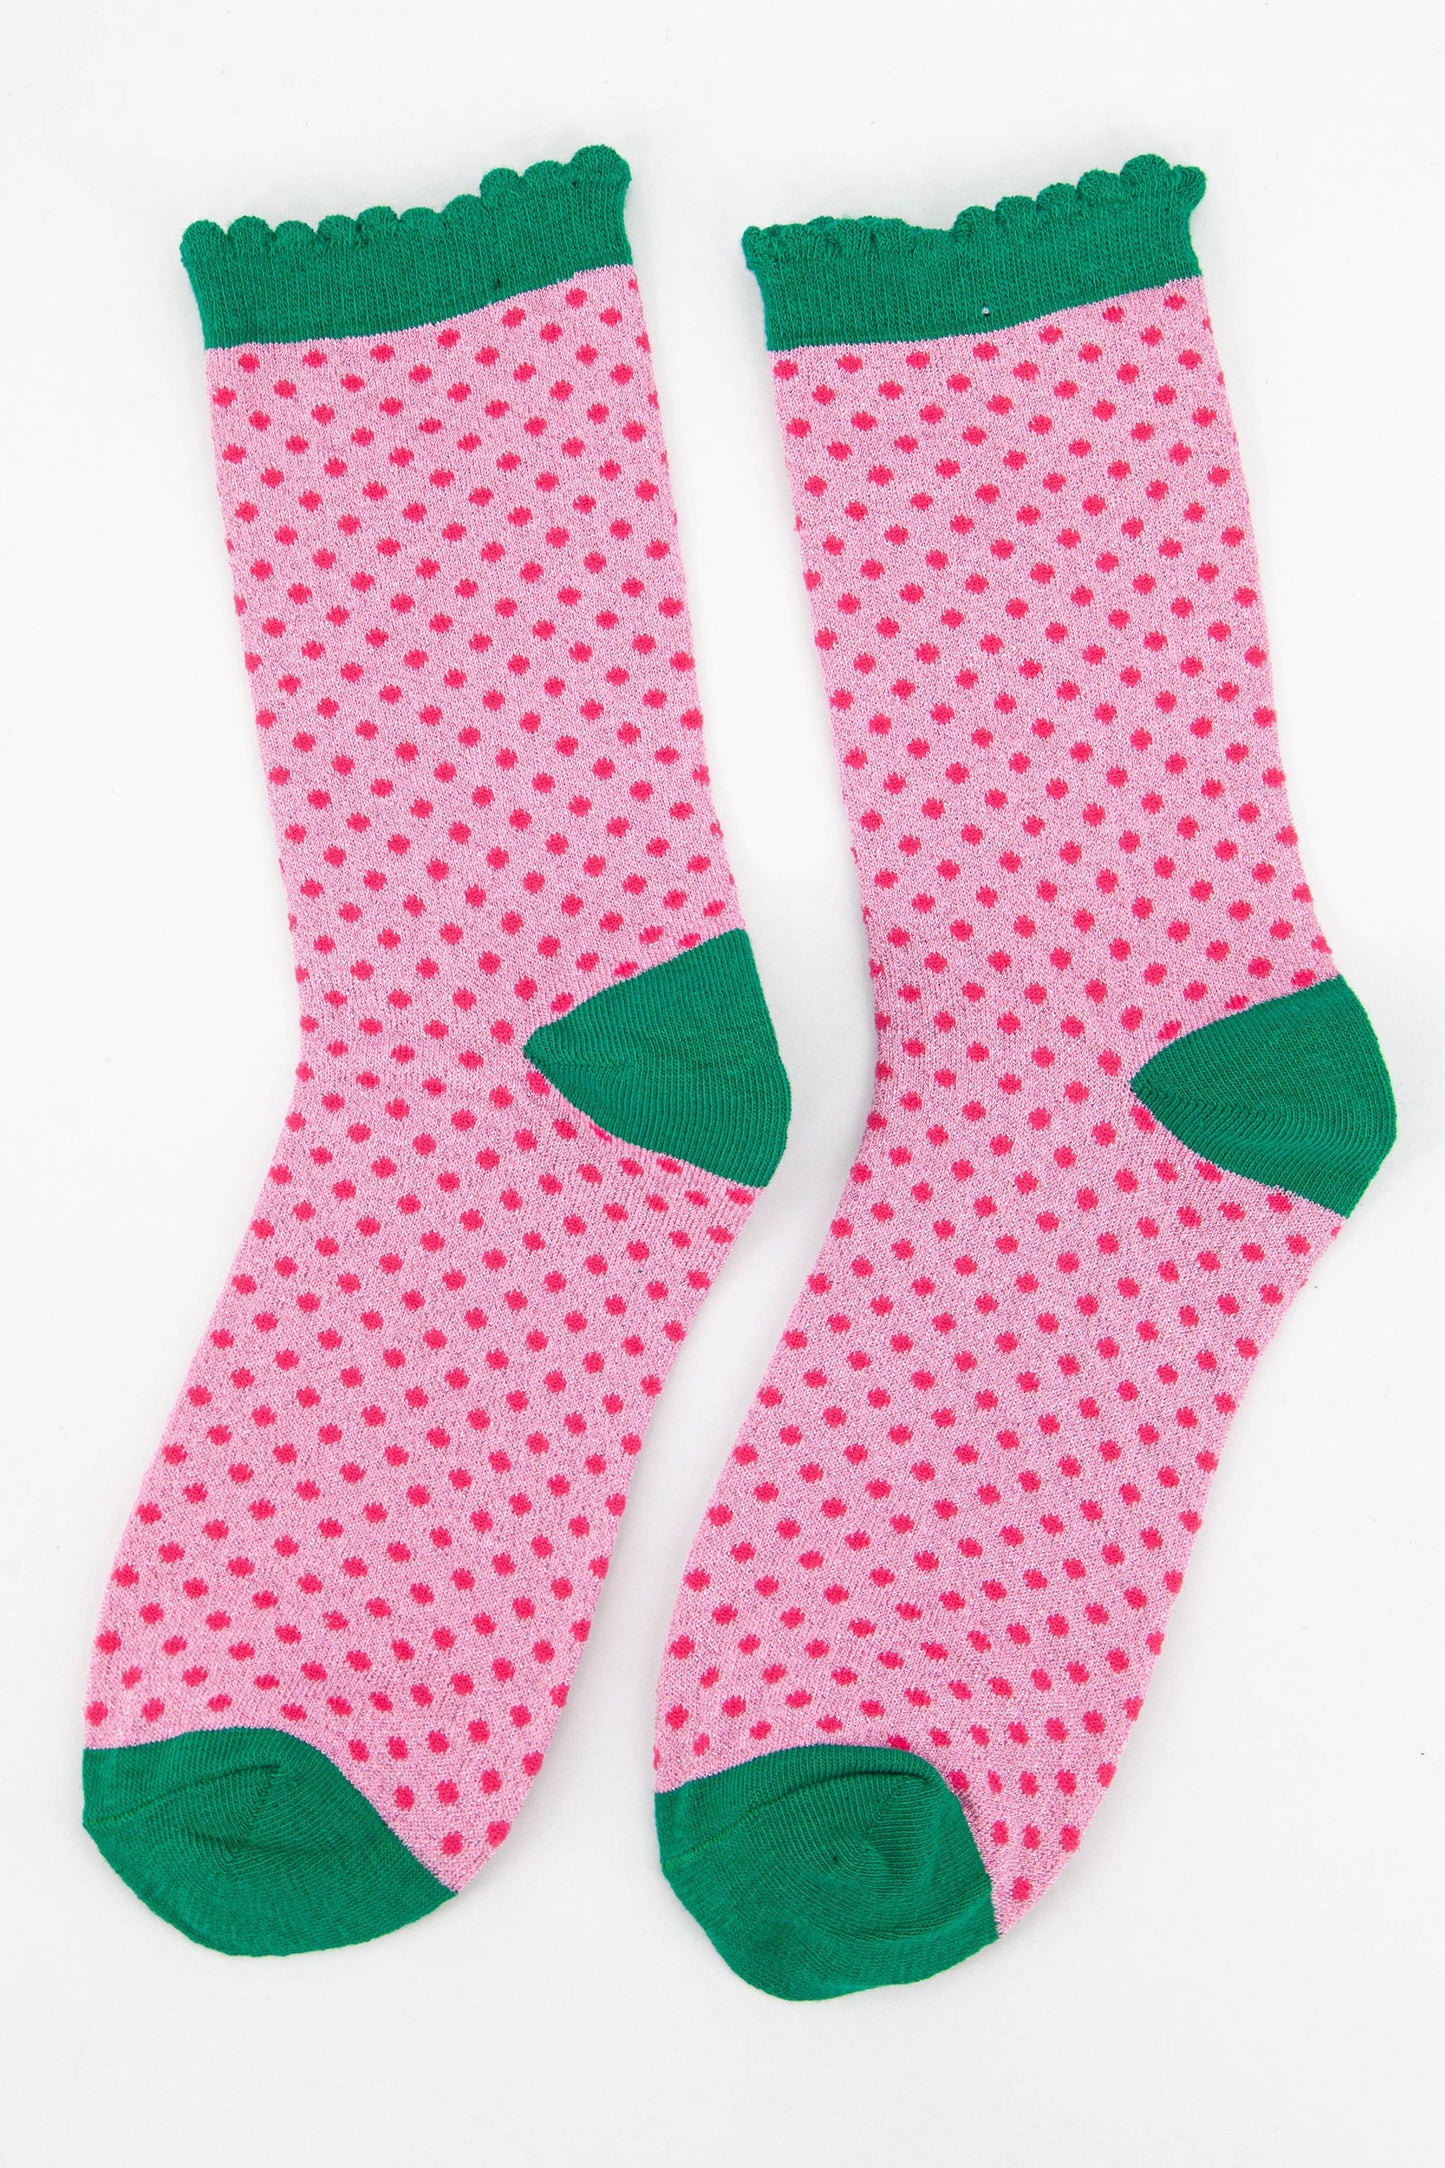 pink polka dot sparkly ankle socks with a green scalloped edge